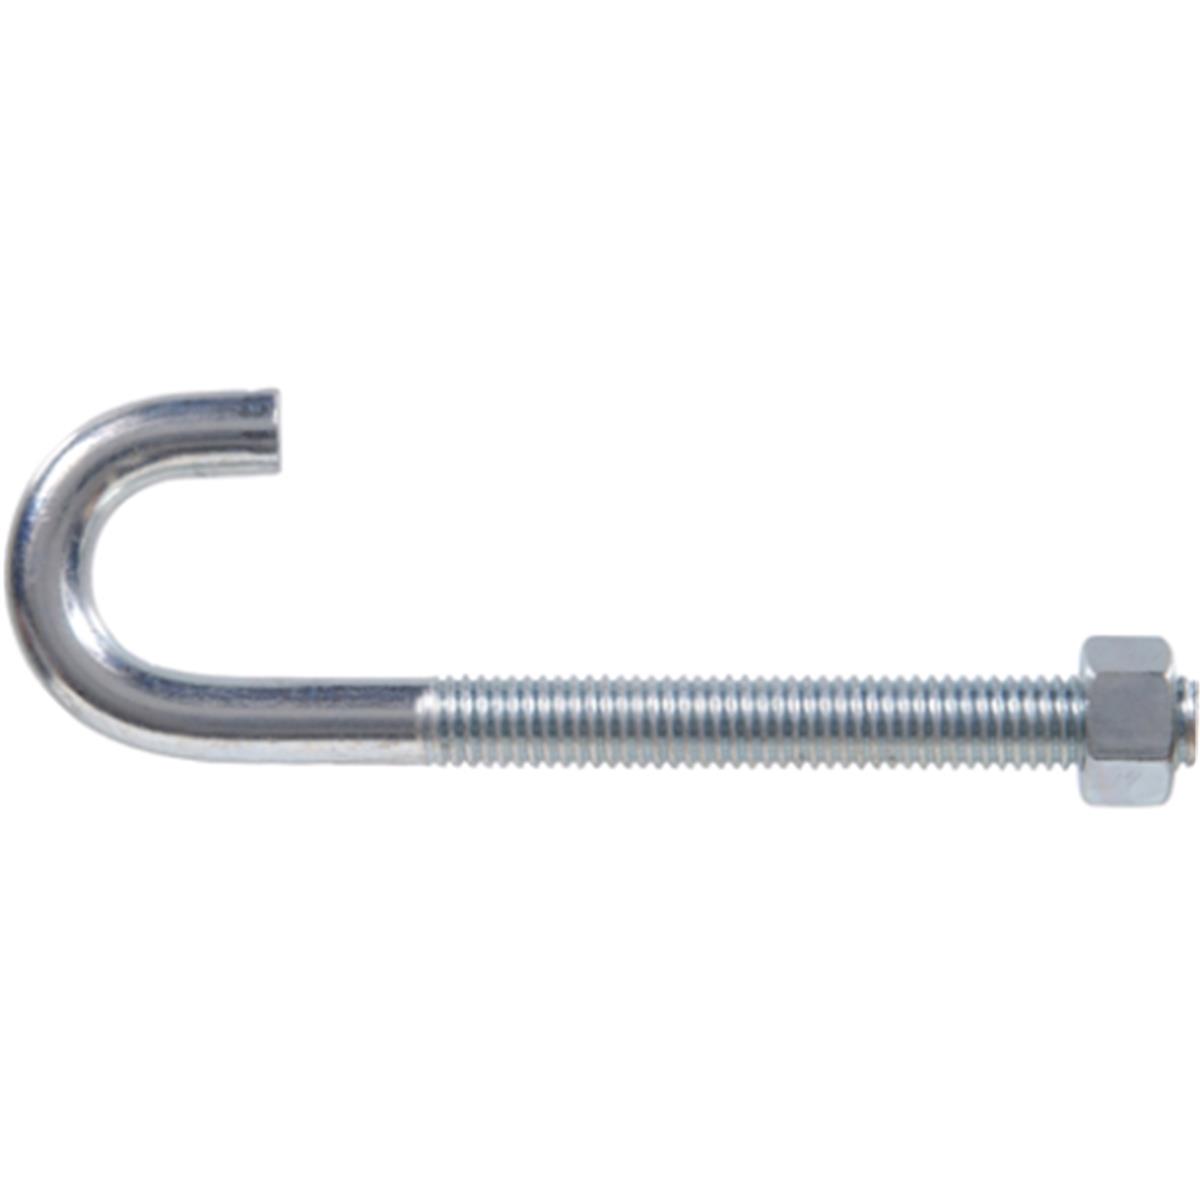 0.5-13 X 6 In. Zinc Plated J-bolt With Nut, Pack Of 10